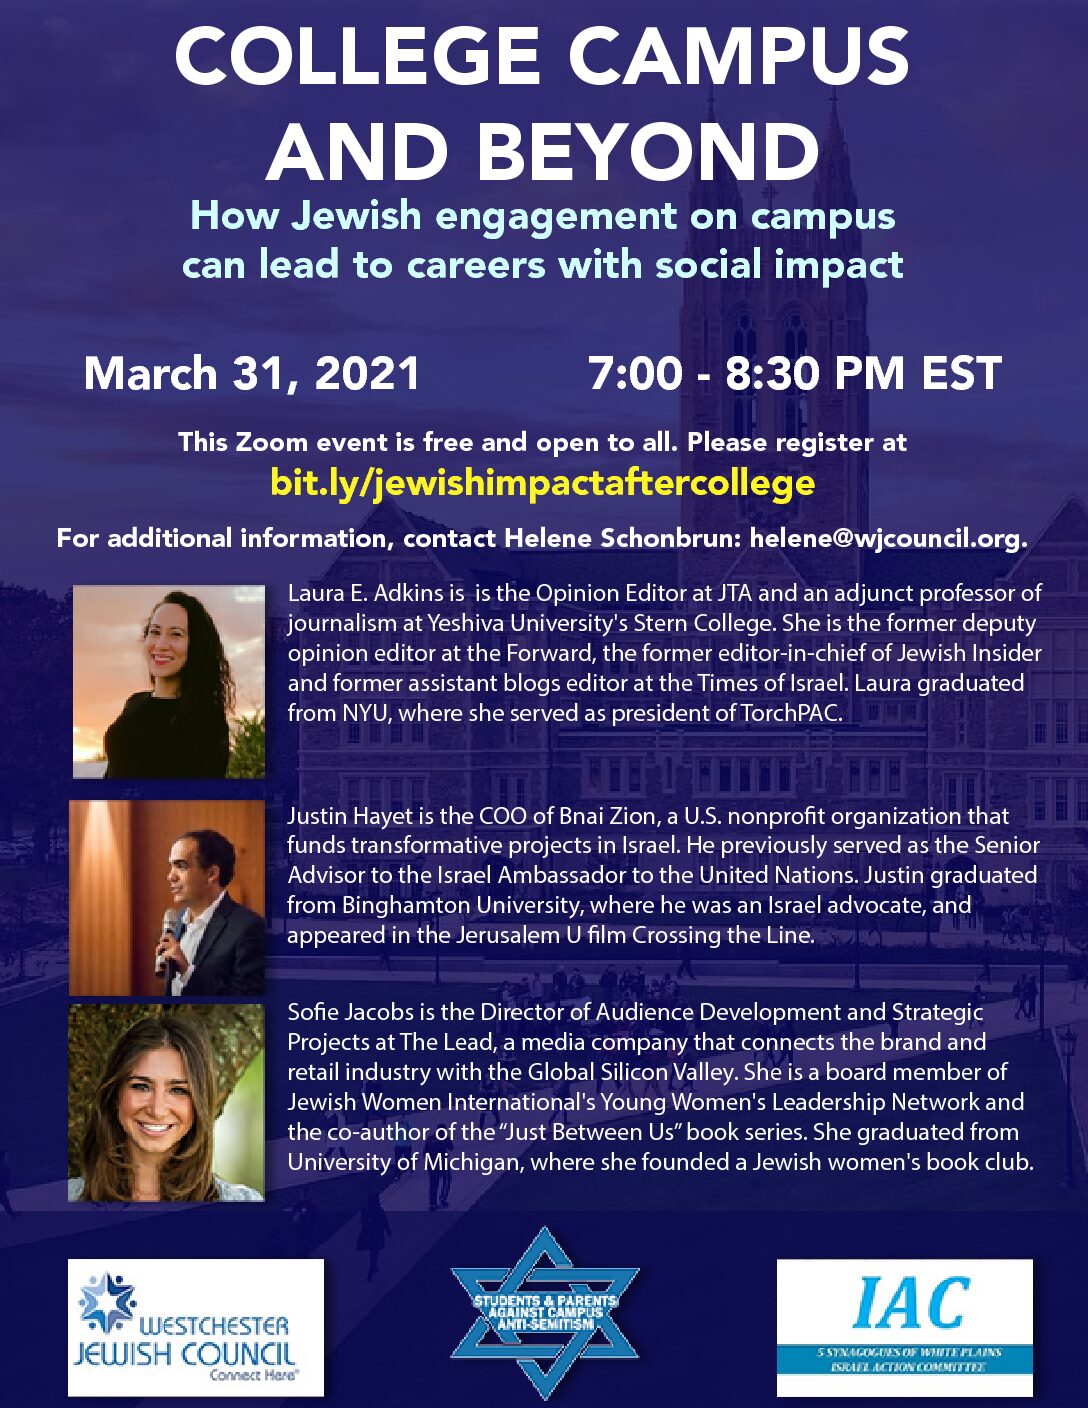 SPACA, 5 Synagogues of White Plains and Westchester Jewish Council -College Campus and Beyond - How Jewish engagement on campus can lead to careers with social impa